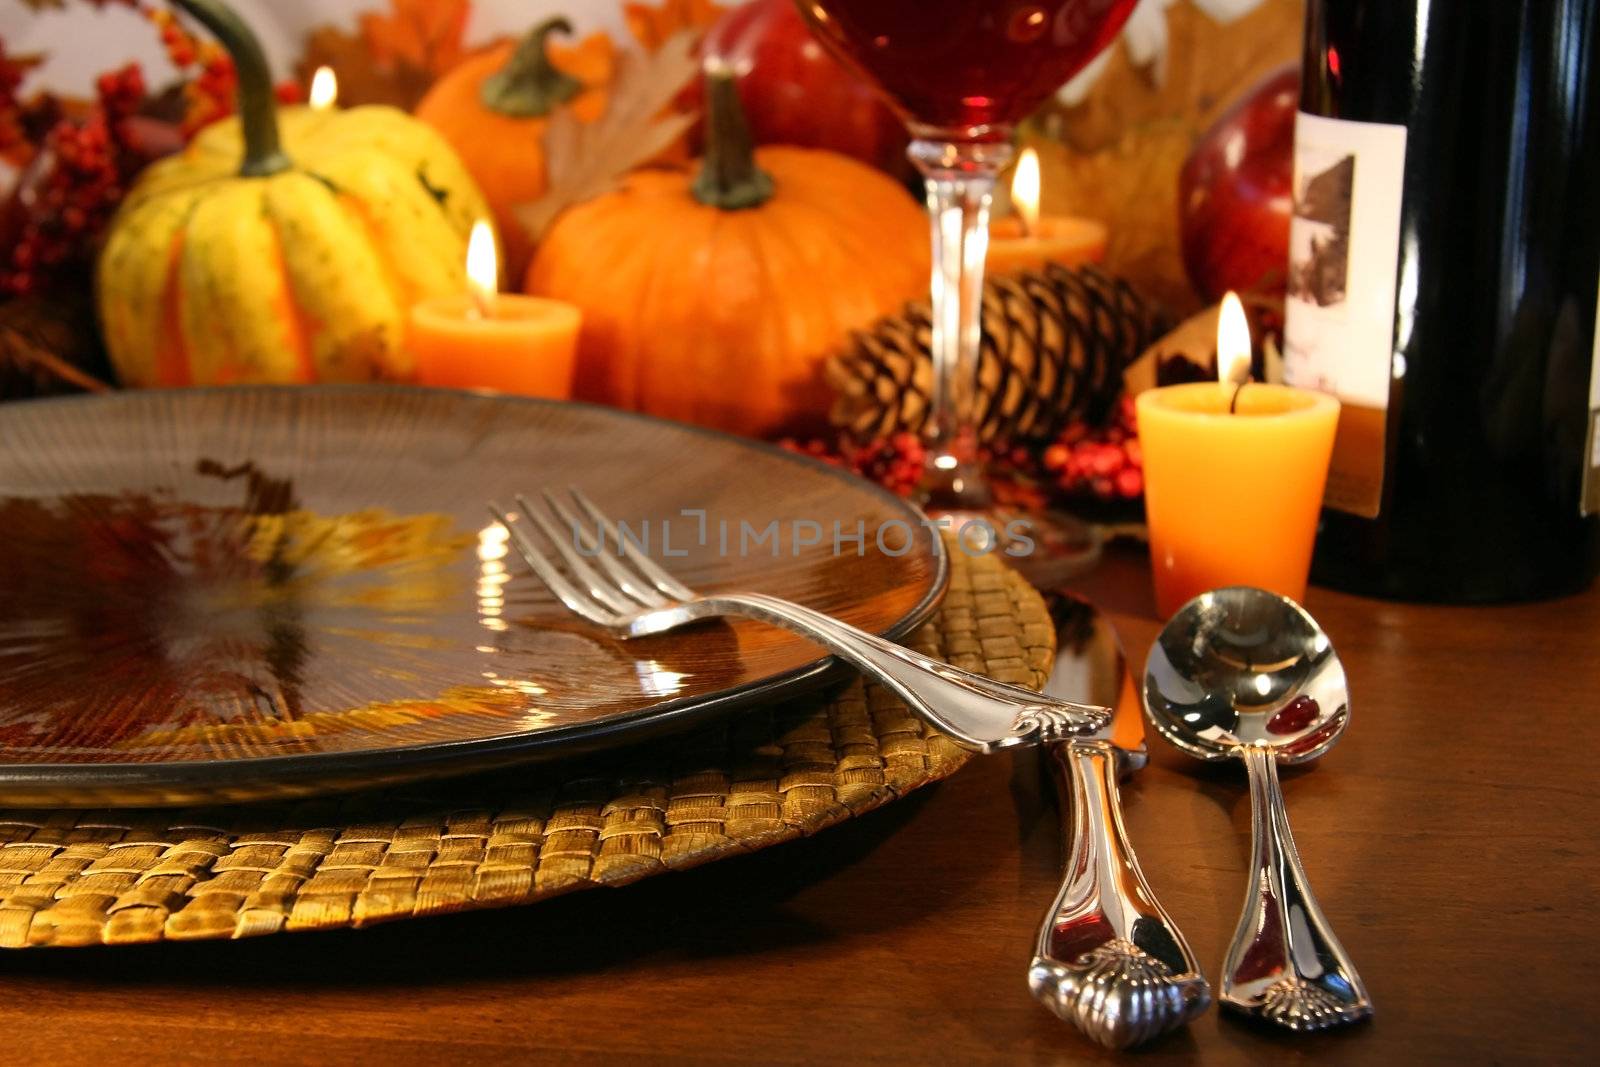 Table set for Thanksgiving by Sandralise